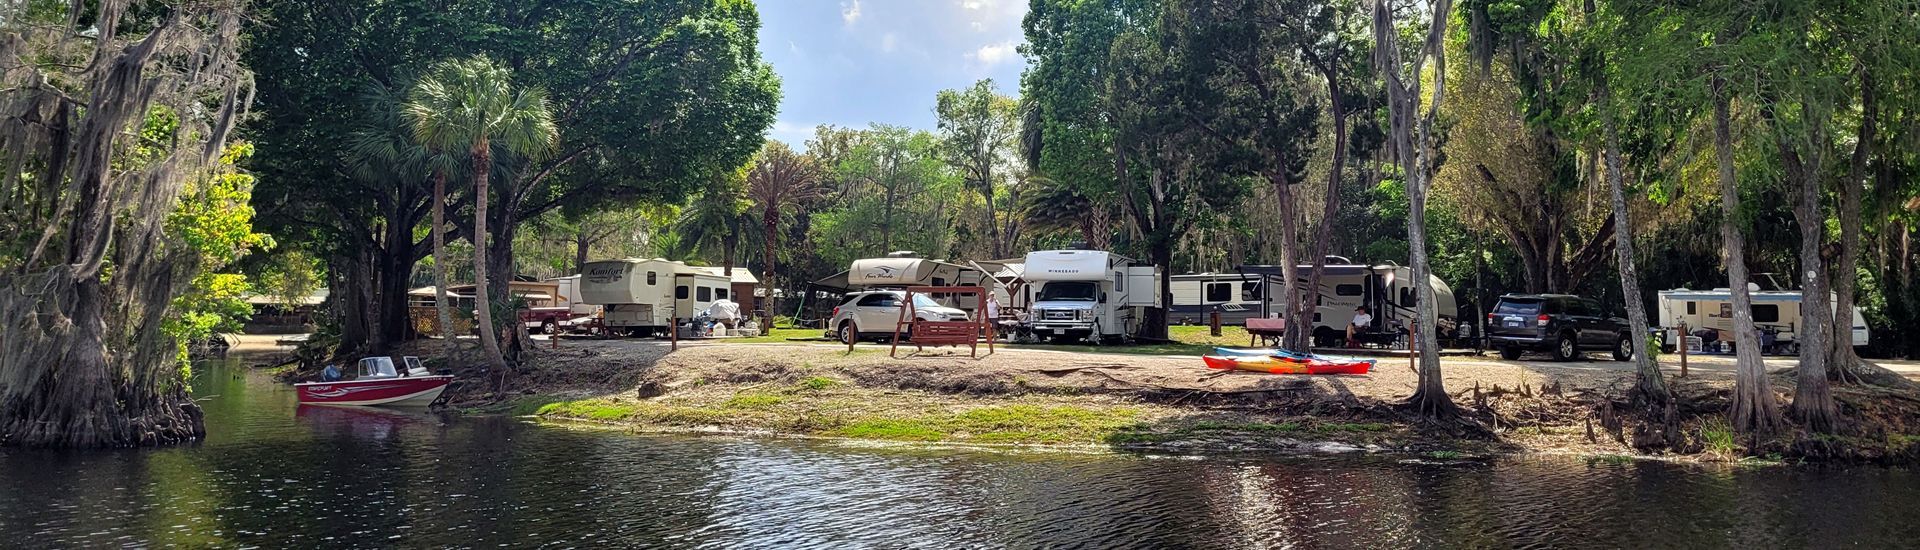 a row of rvs are parked on the shore of a lake surrounded by trees .